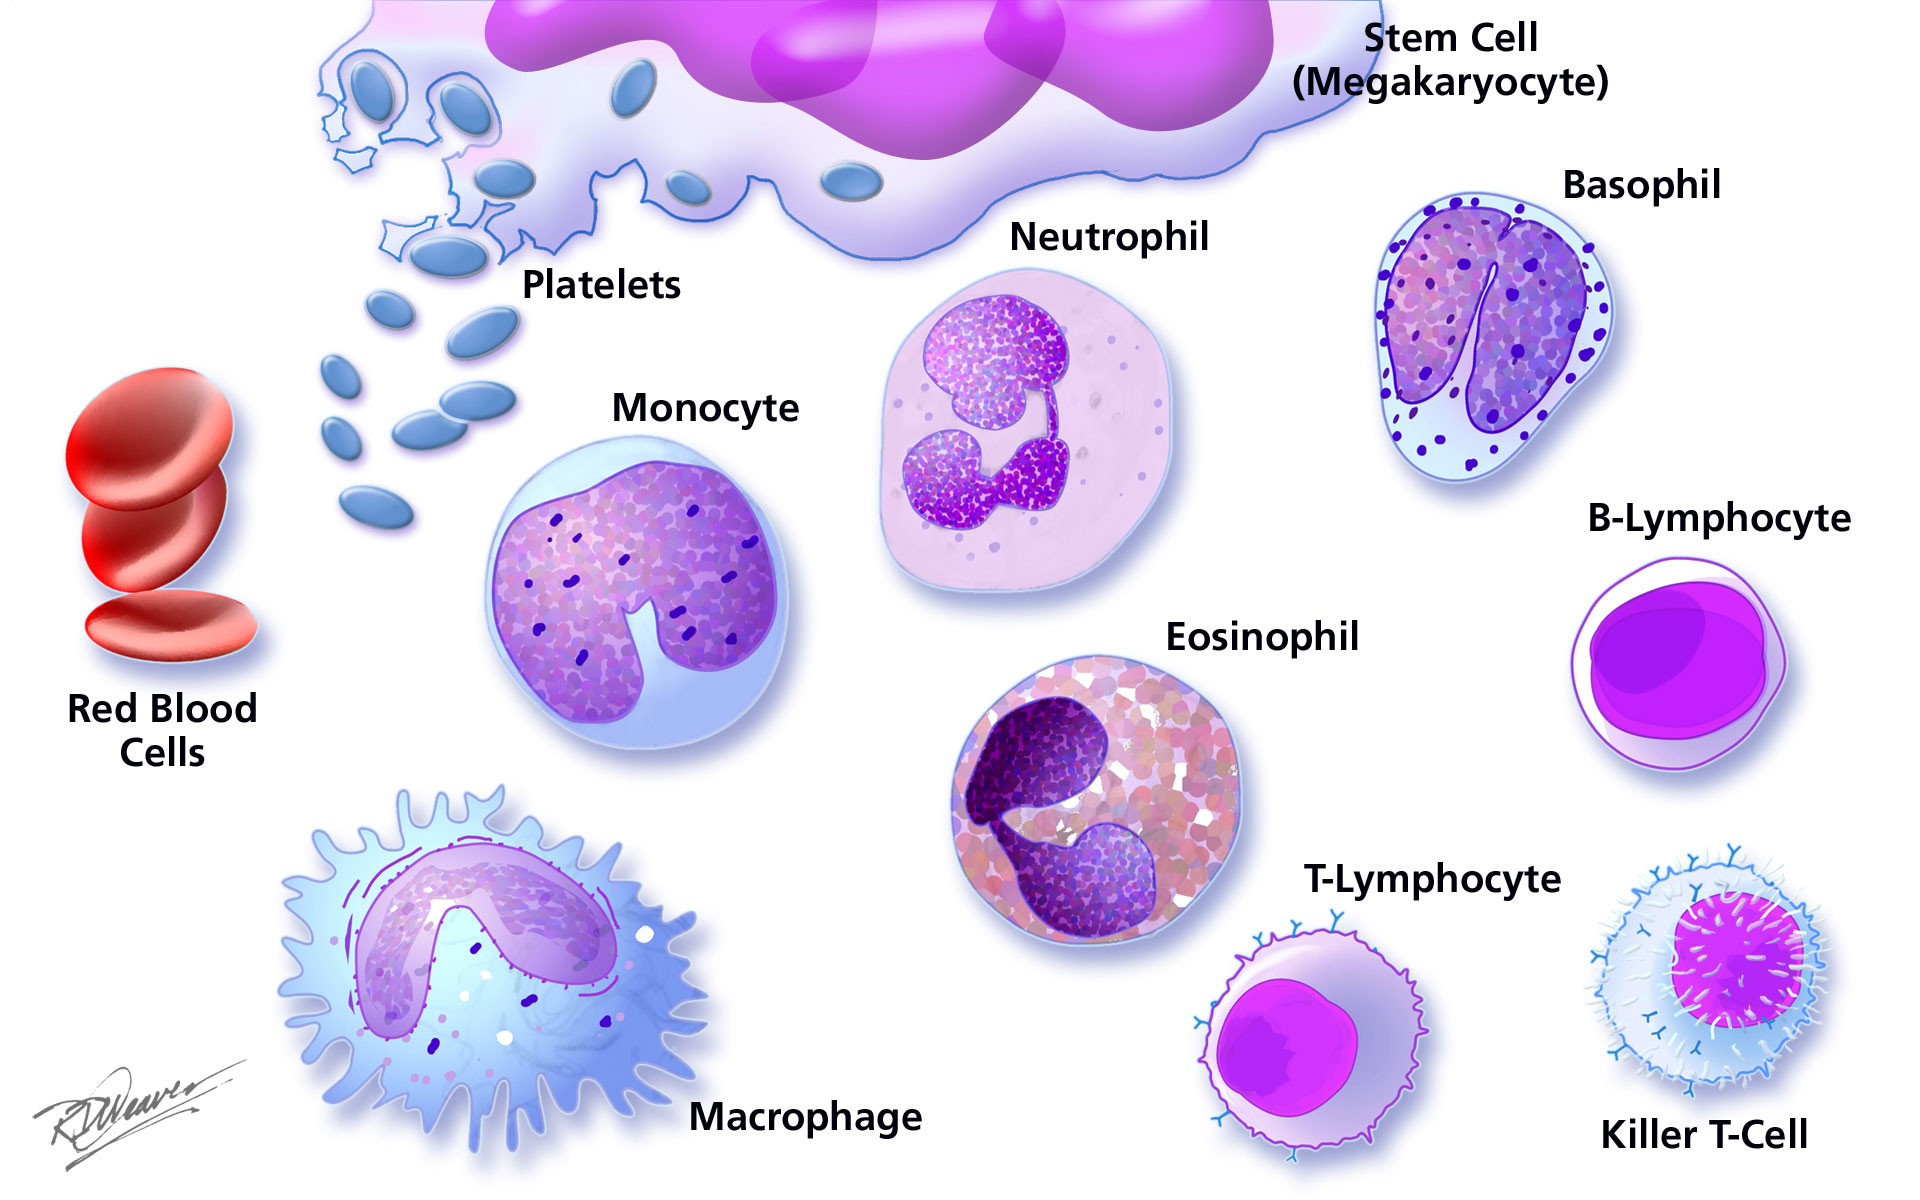 10 Types Of Human Cells